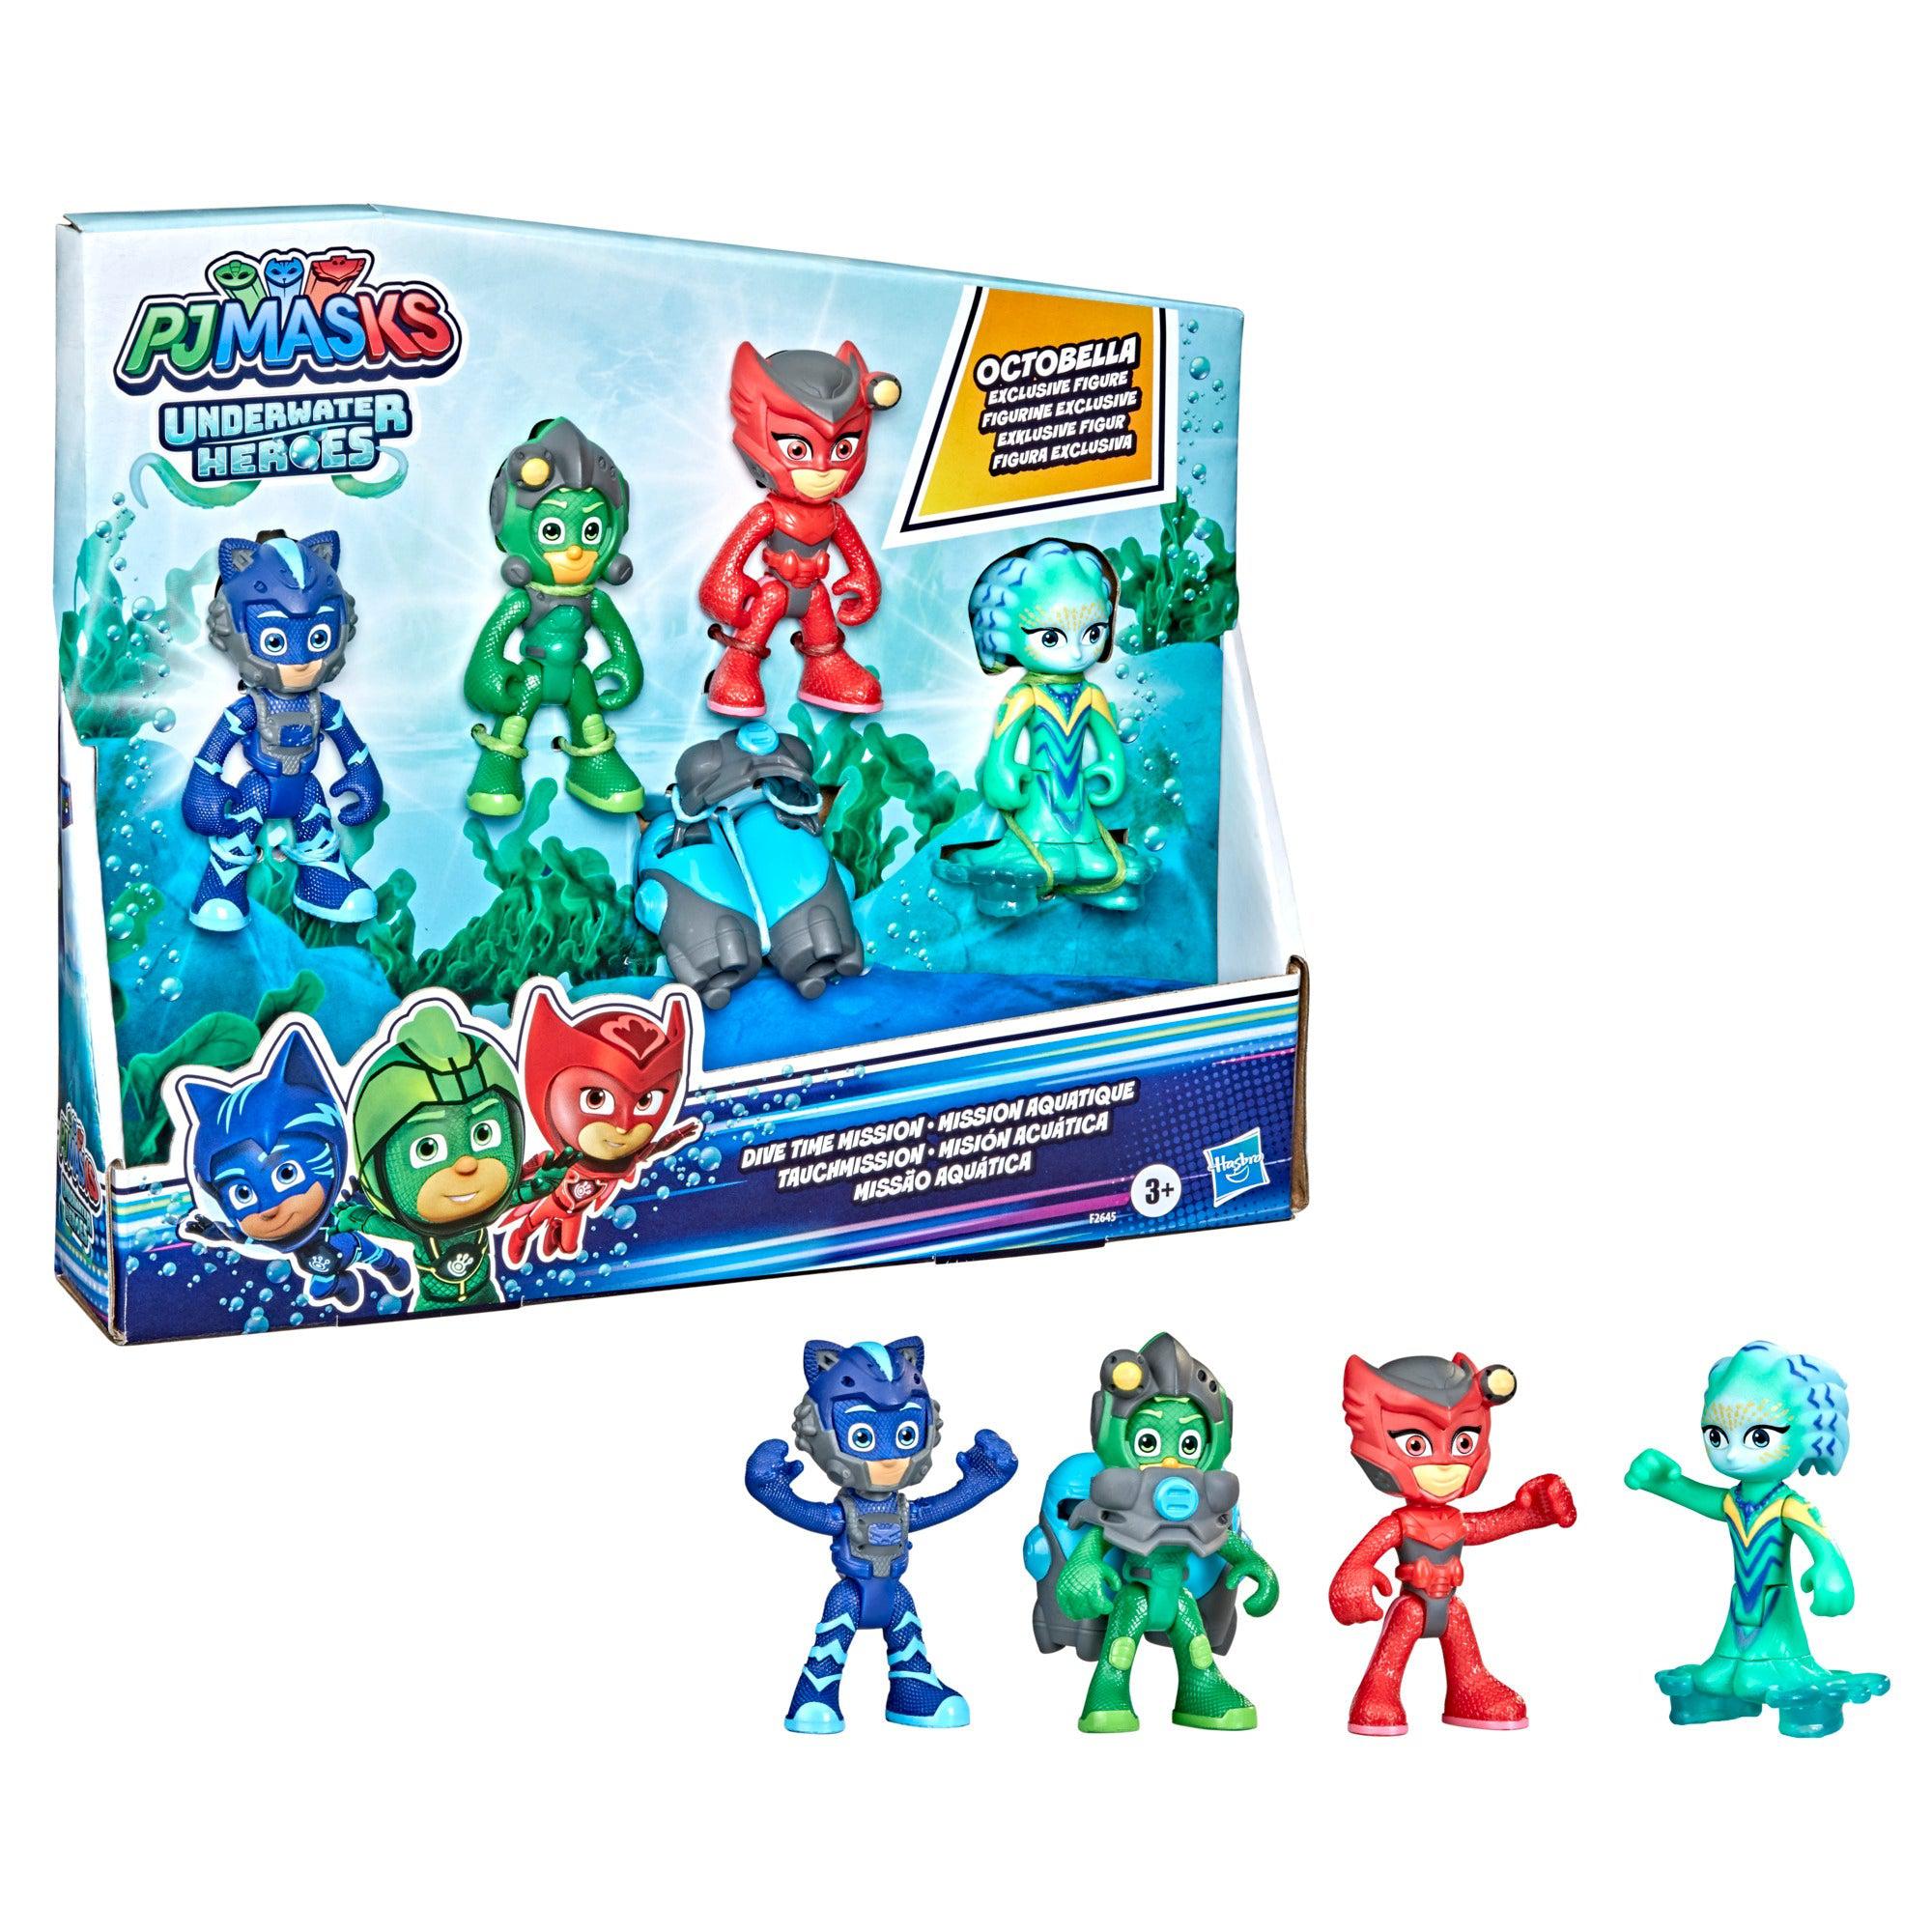 Hasbro-PJ Masks Underwater Heroes Dive Time Mission-F2645-Legacy Toys